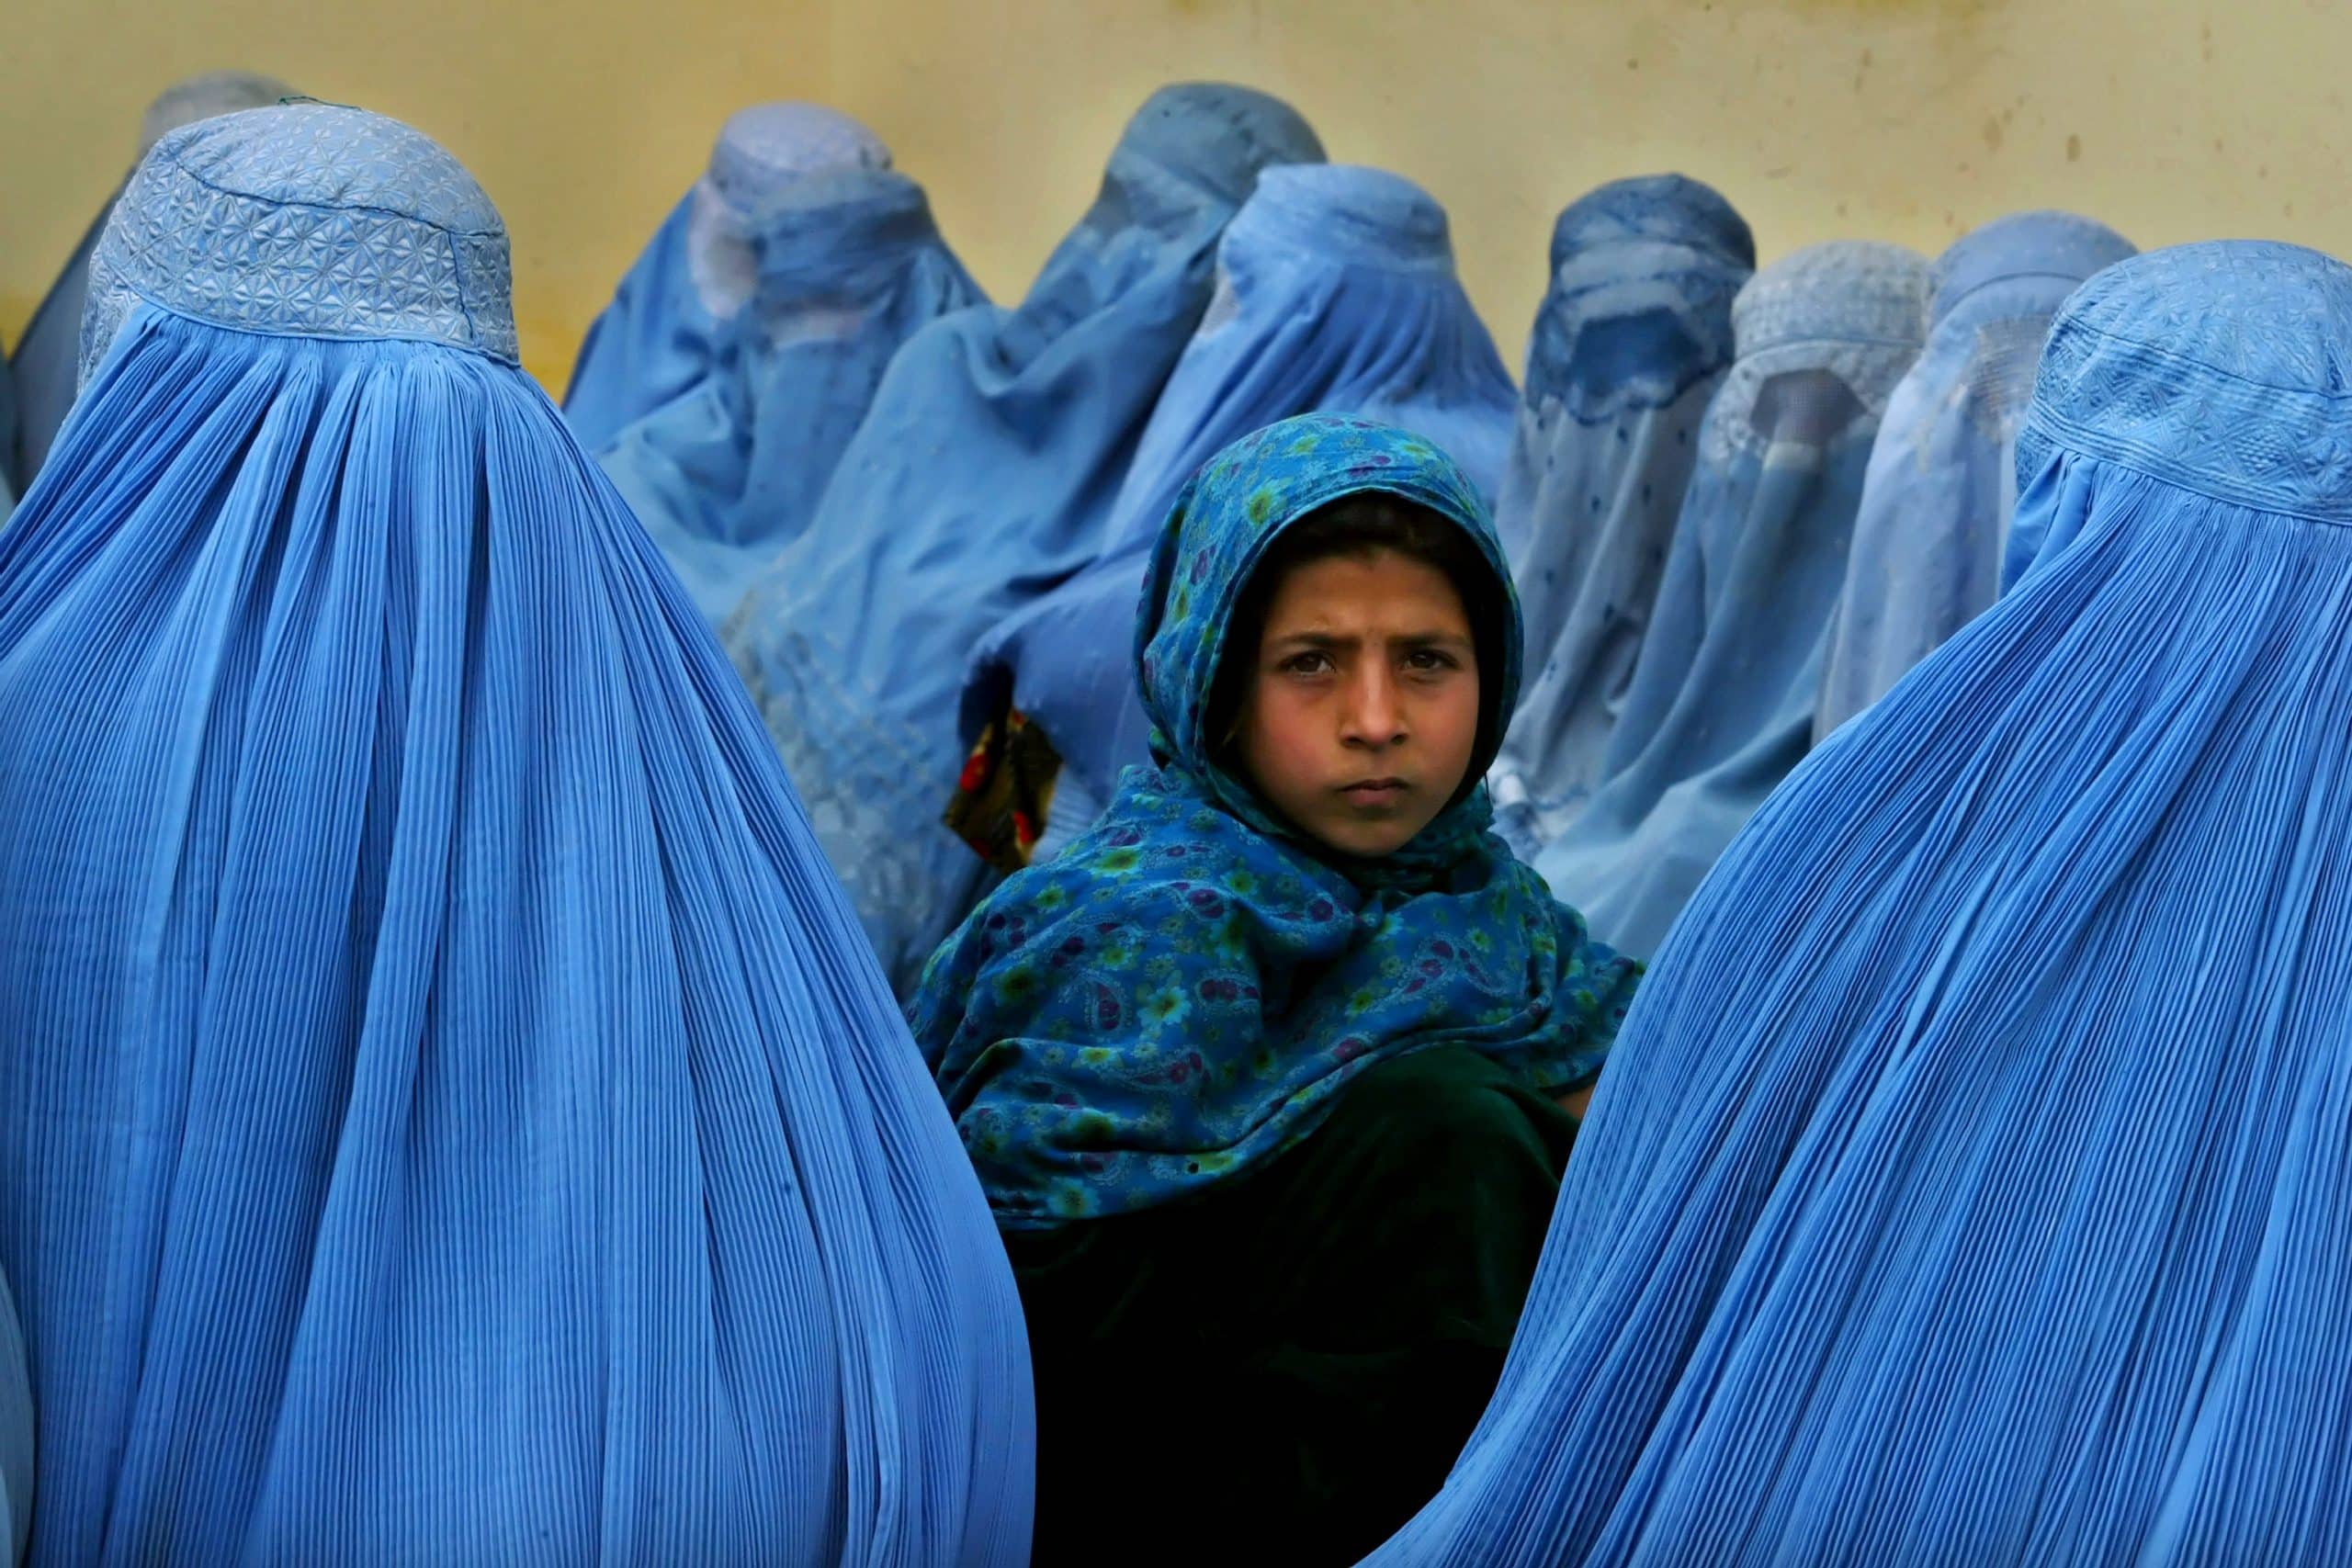 Paula Bronstein: The Advantages of Being a Female Photojournalist in Afghanistan